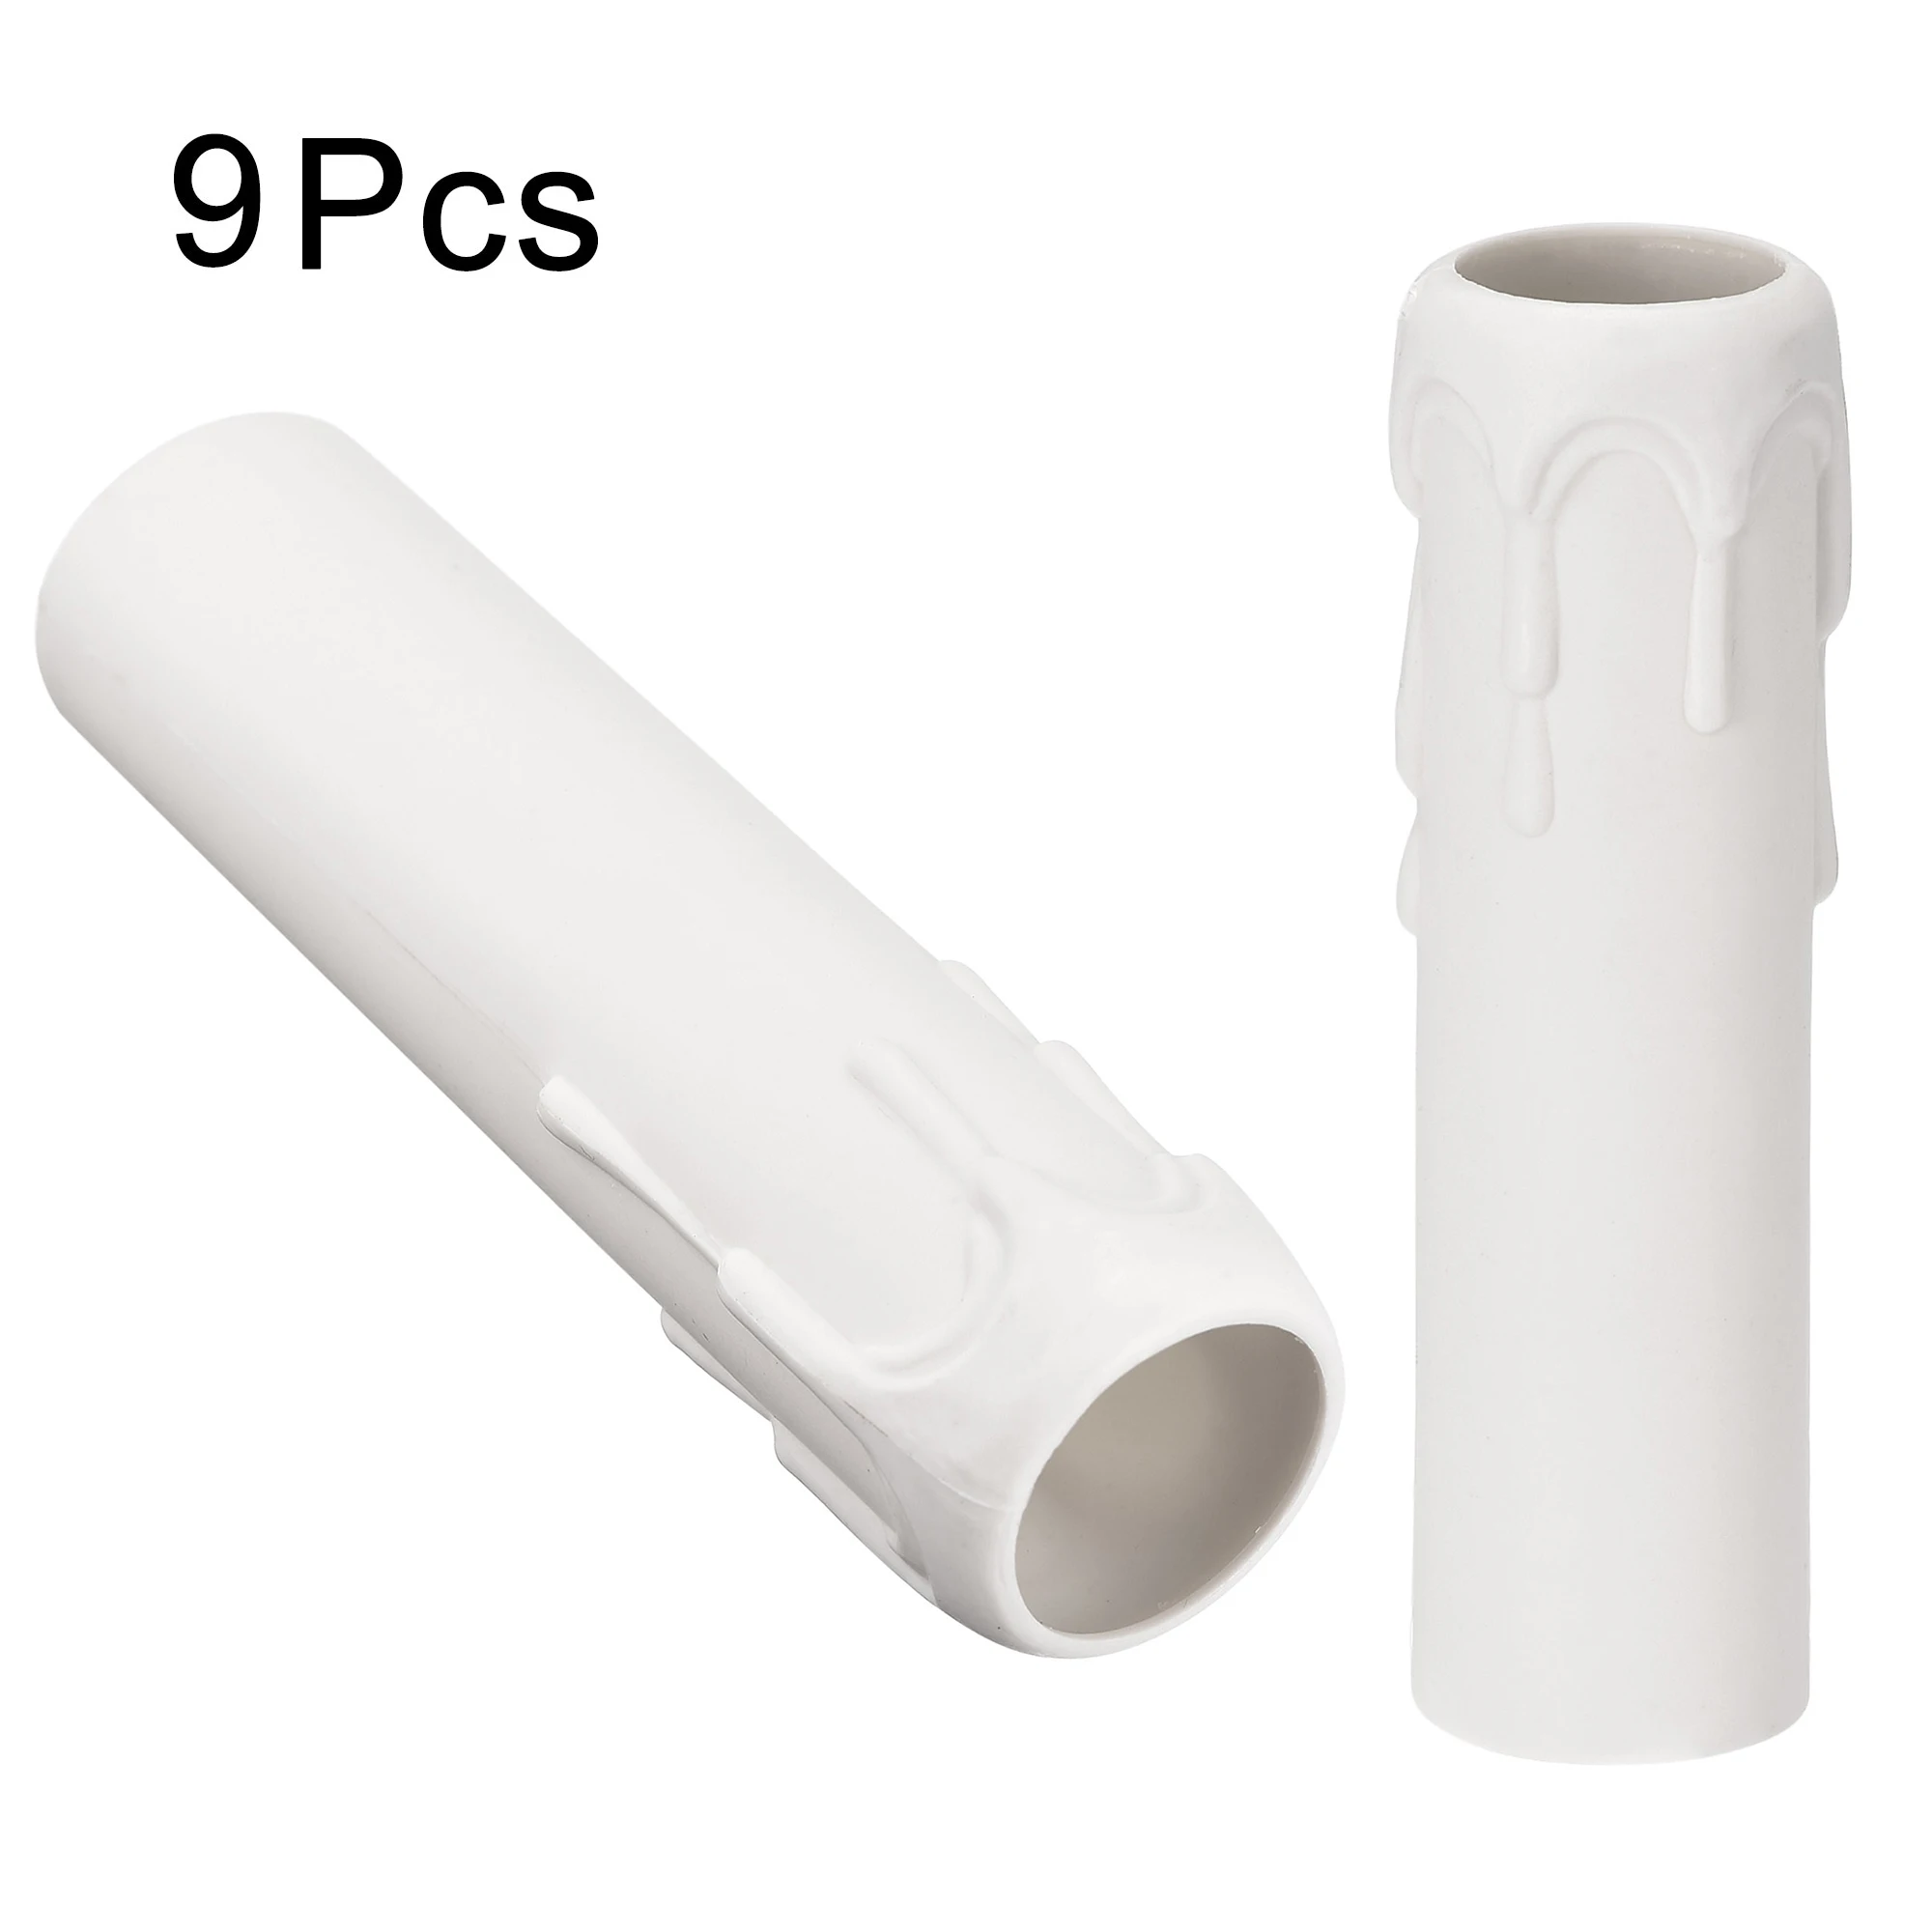 9Pcs 25x100mm White Plastic Candle Bulb Base Covers Sleeves Candle Lamp Holder Tube Candle Lamp Base Sleeve for E14 Chandelier marine waterproof wiring hole kayak accessories cable organizer reusable sleeves kayak electrical boot silicone plastic rv yacht